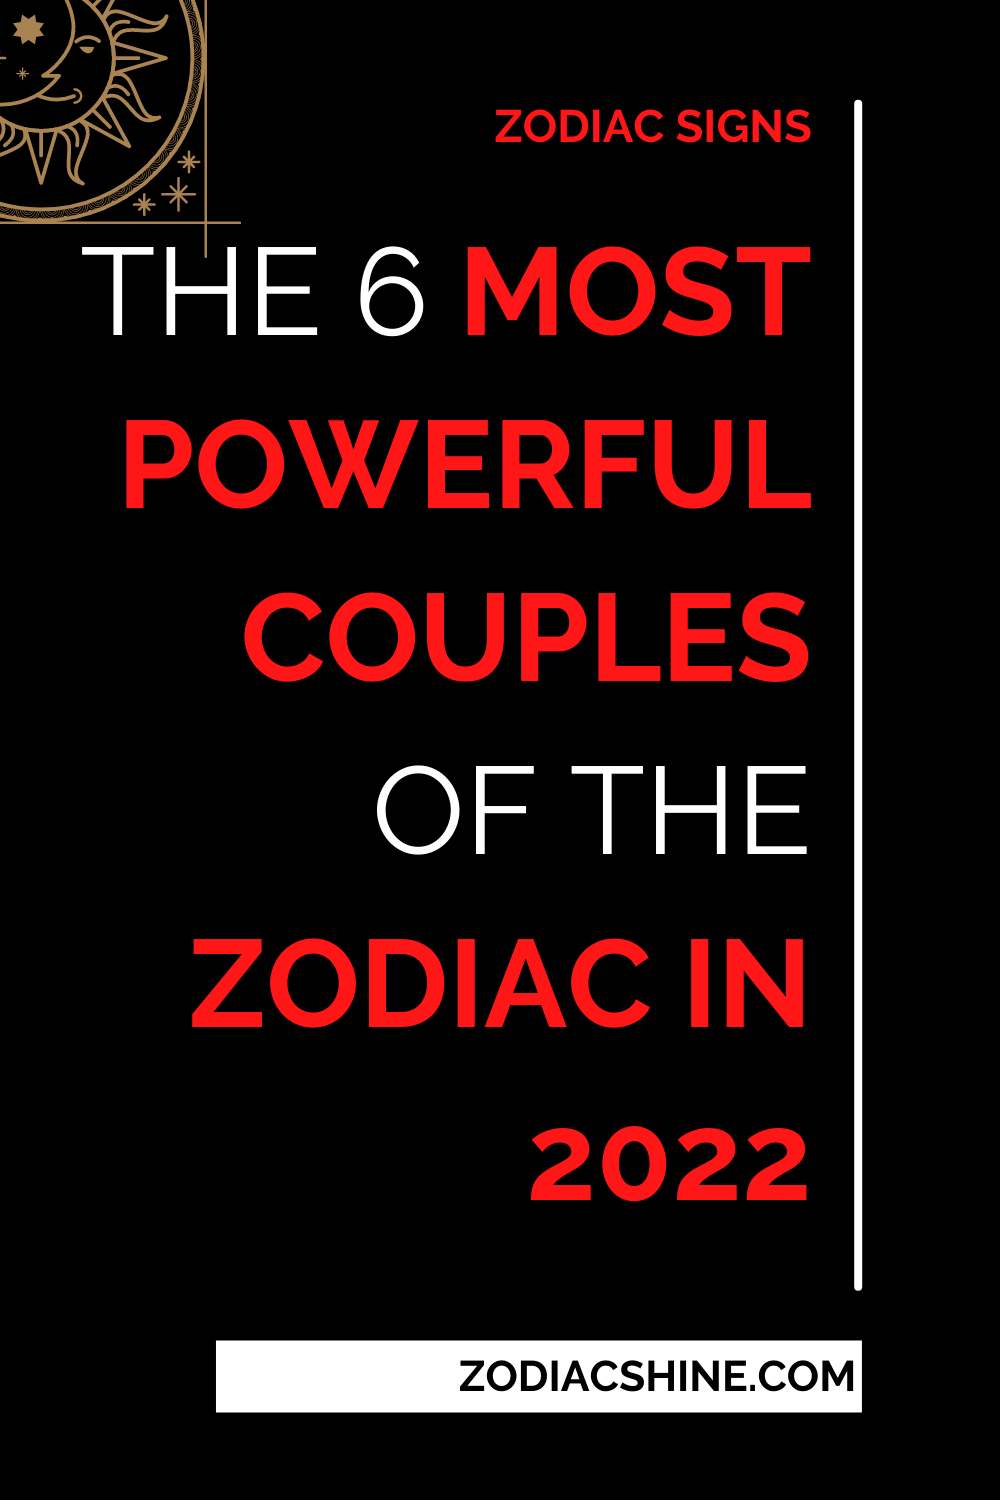 The 6 Most Powerful Couples Of The Zodiac In 2022